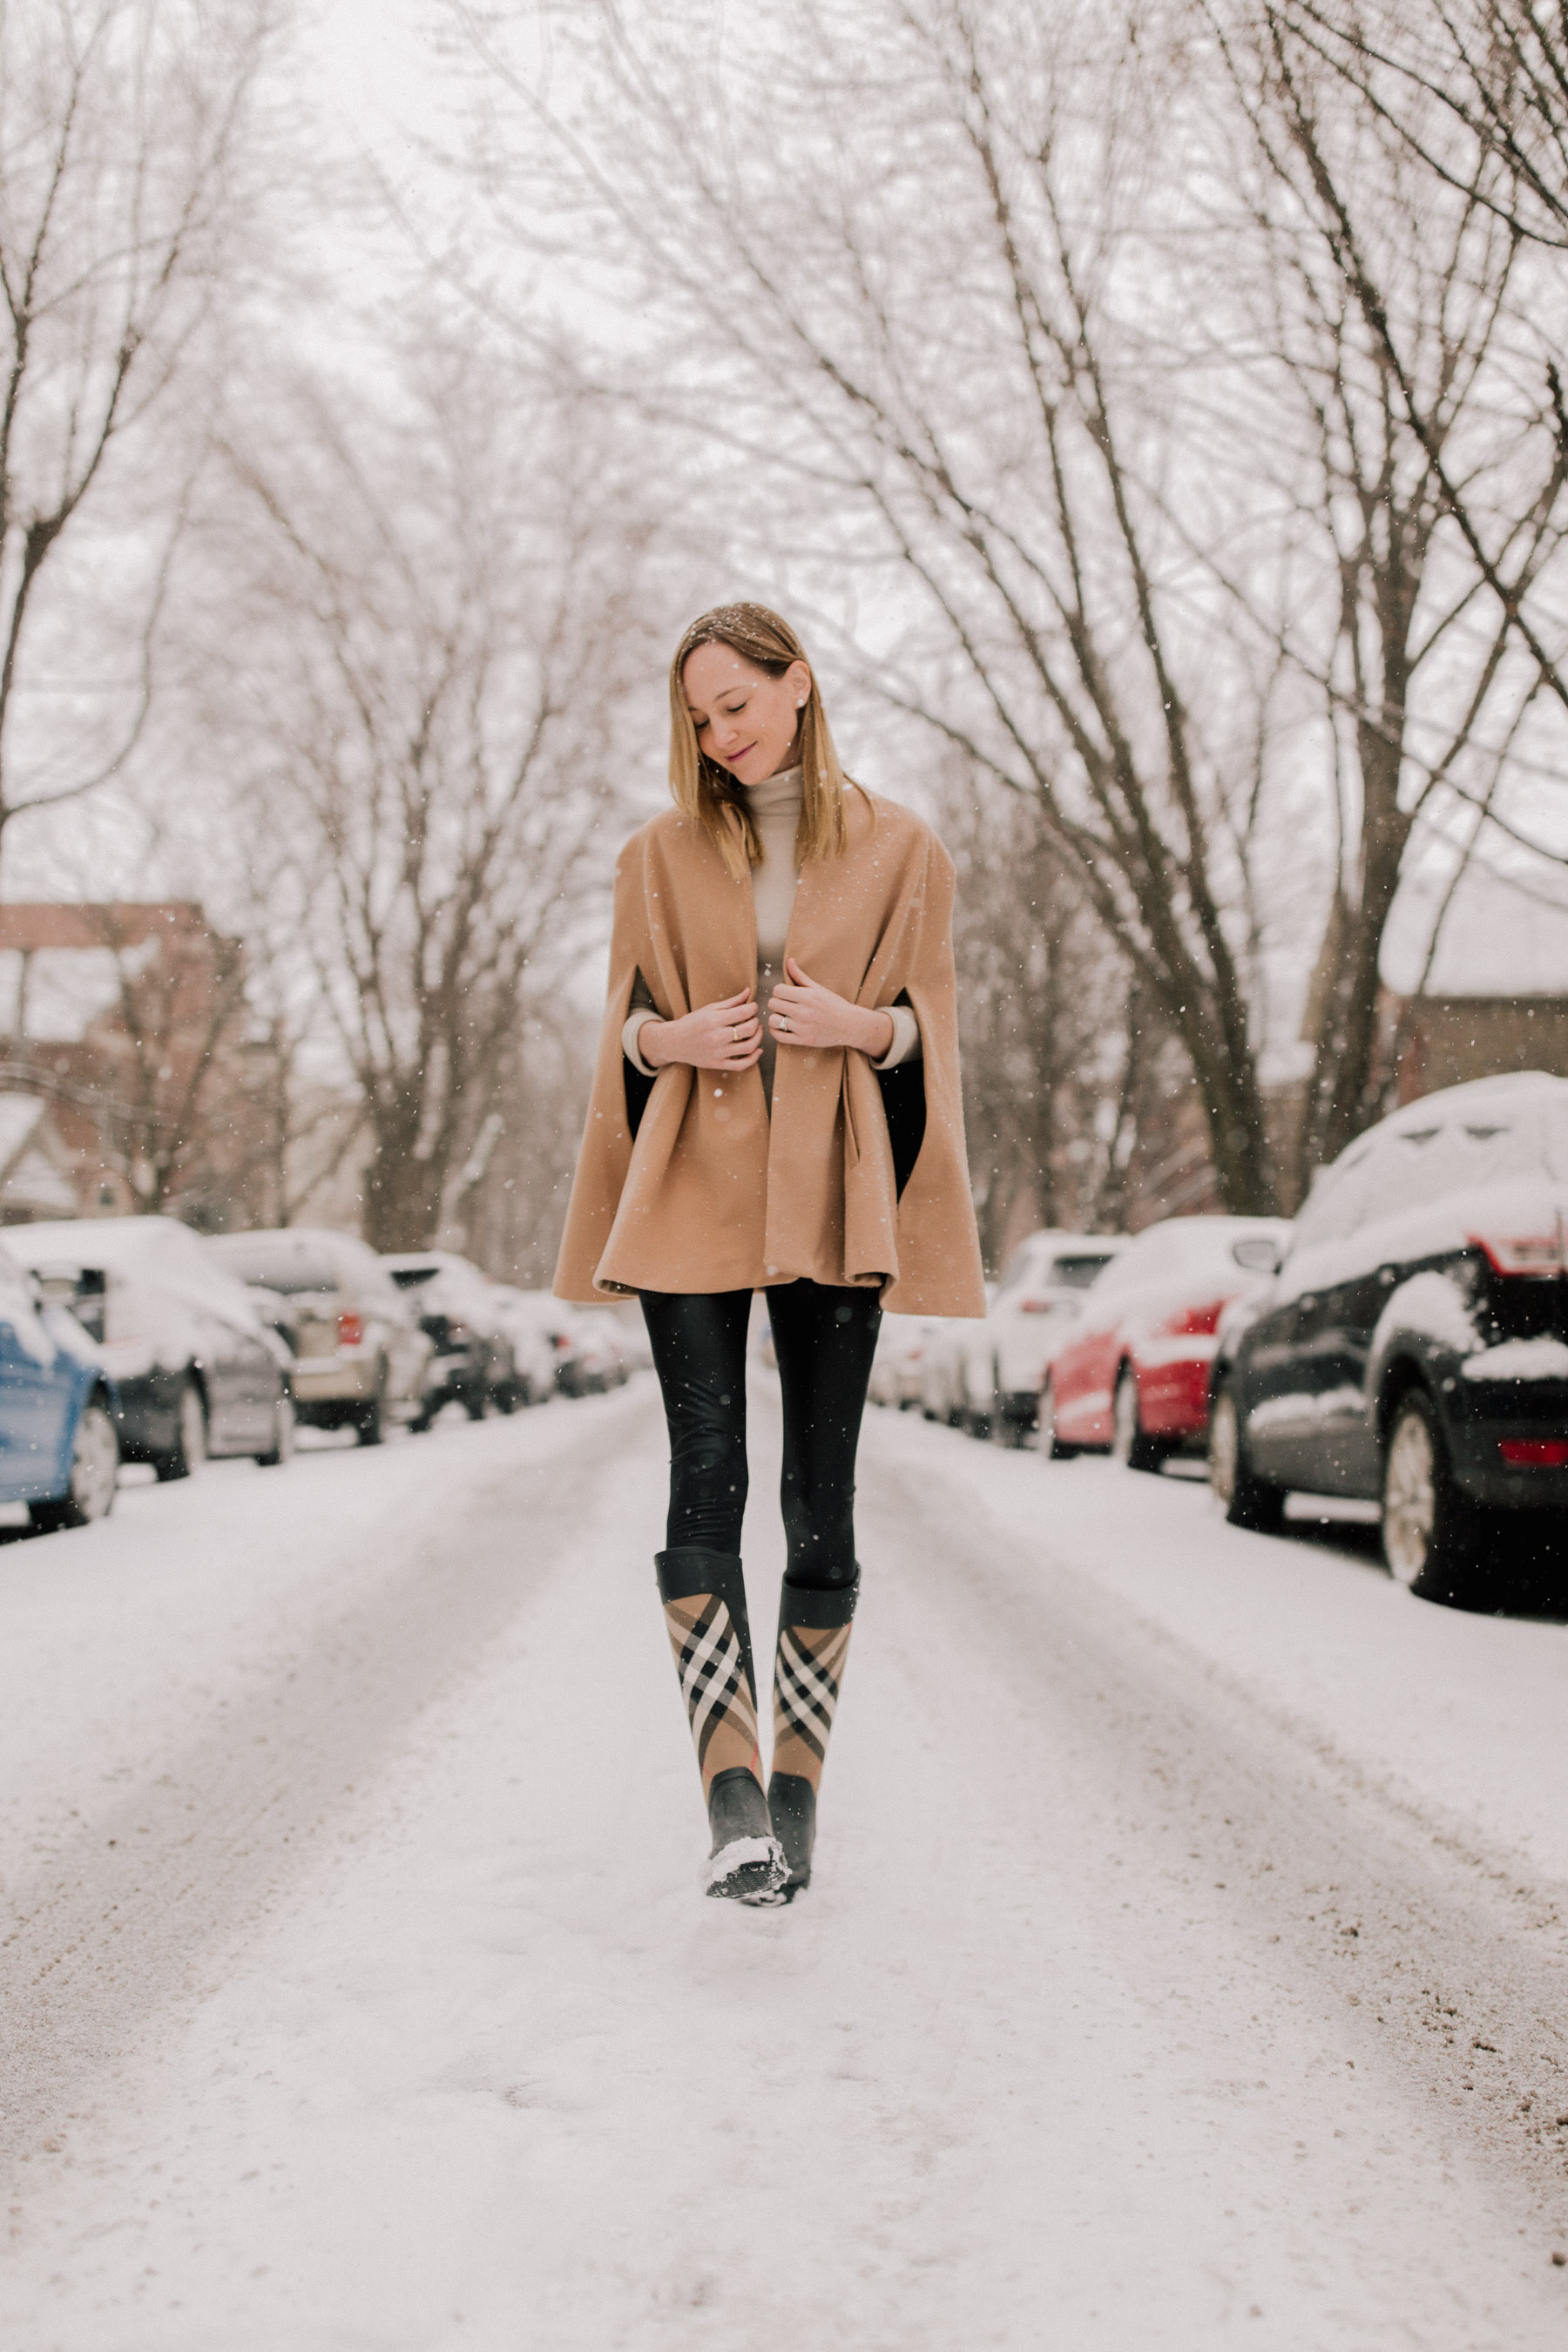 Are the Burberry Marketplace Rain Boots Good for Snow?